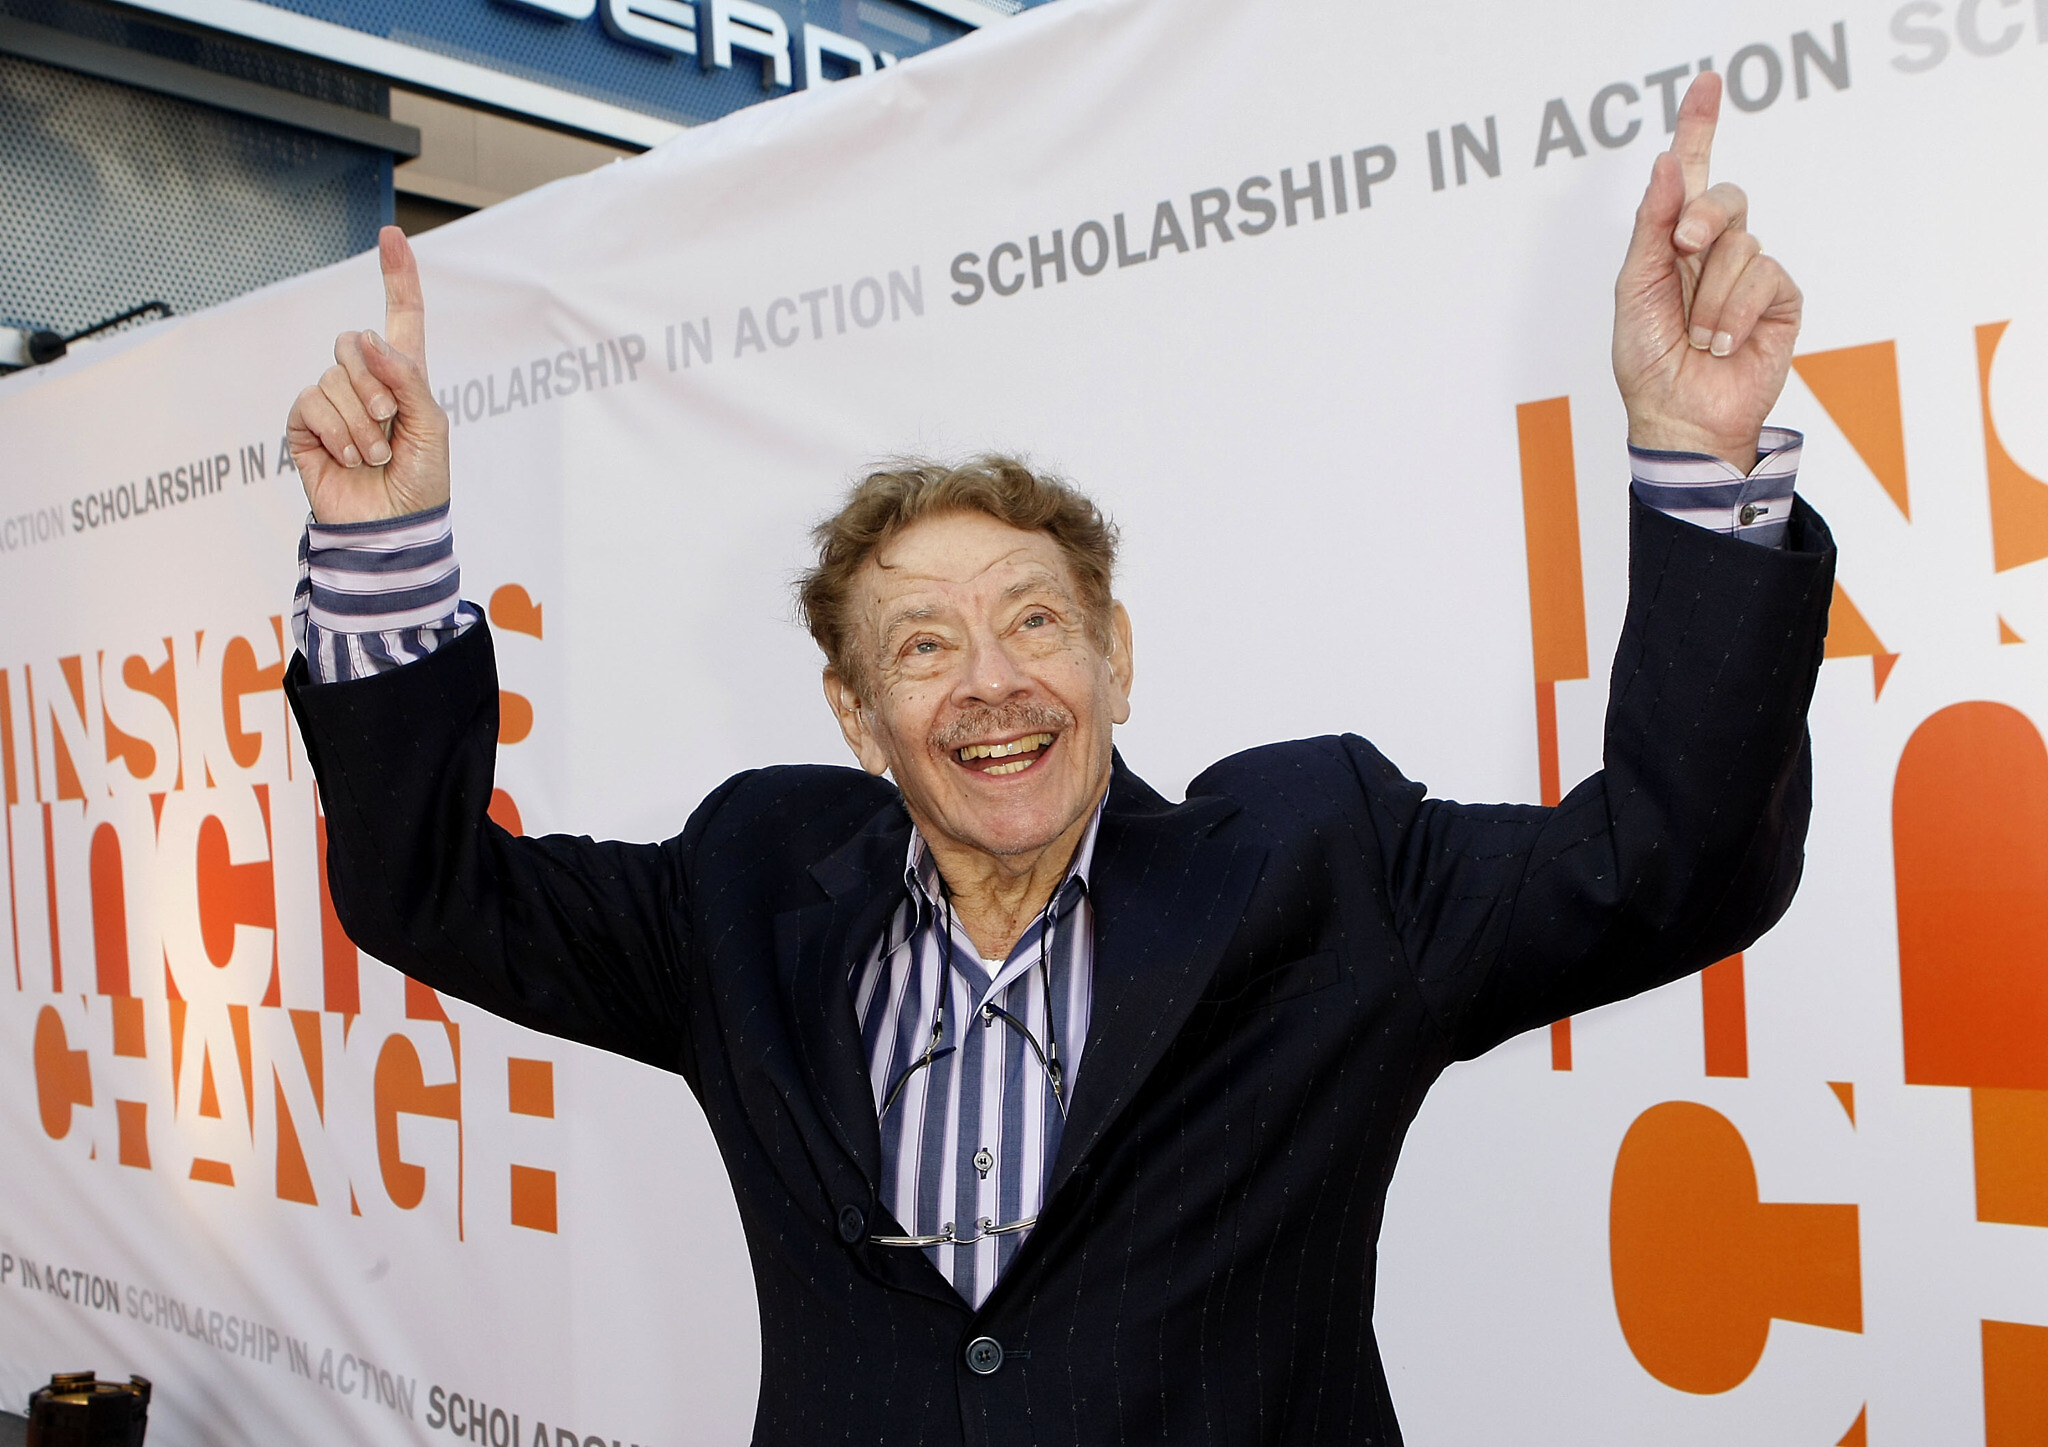 Jerry Stiller, Star Of “Seinfeld” And “The King Of Queens,” Has Died At 92